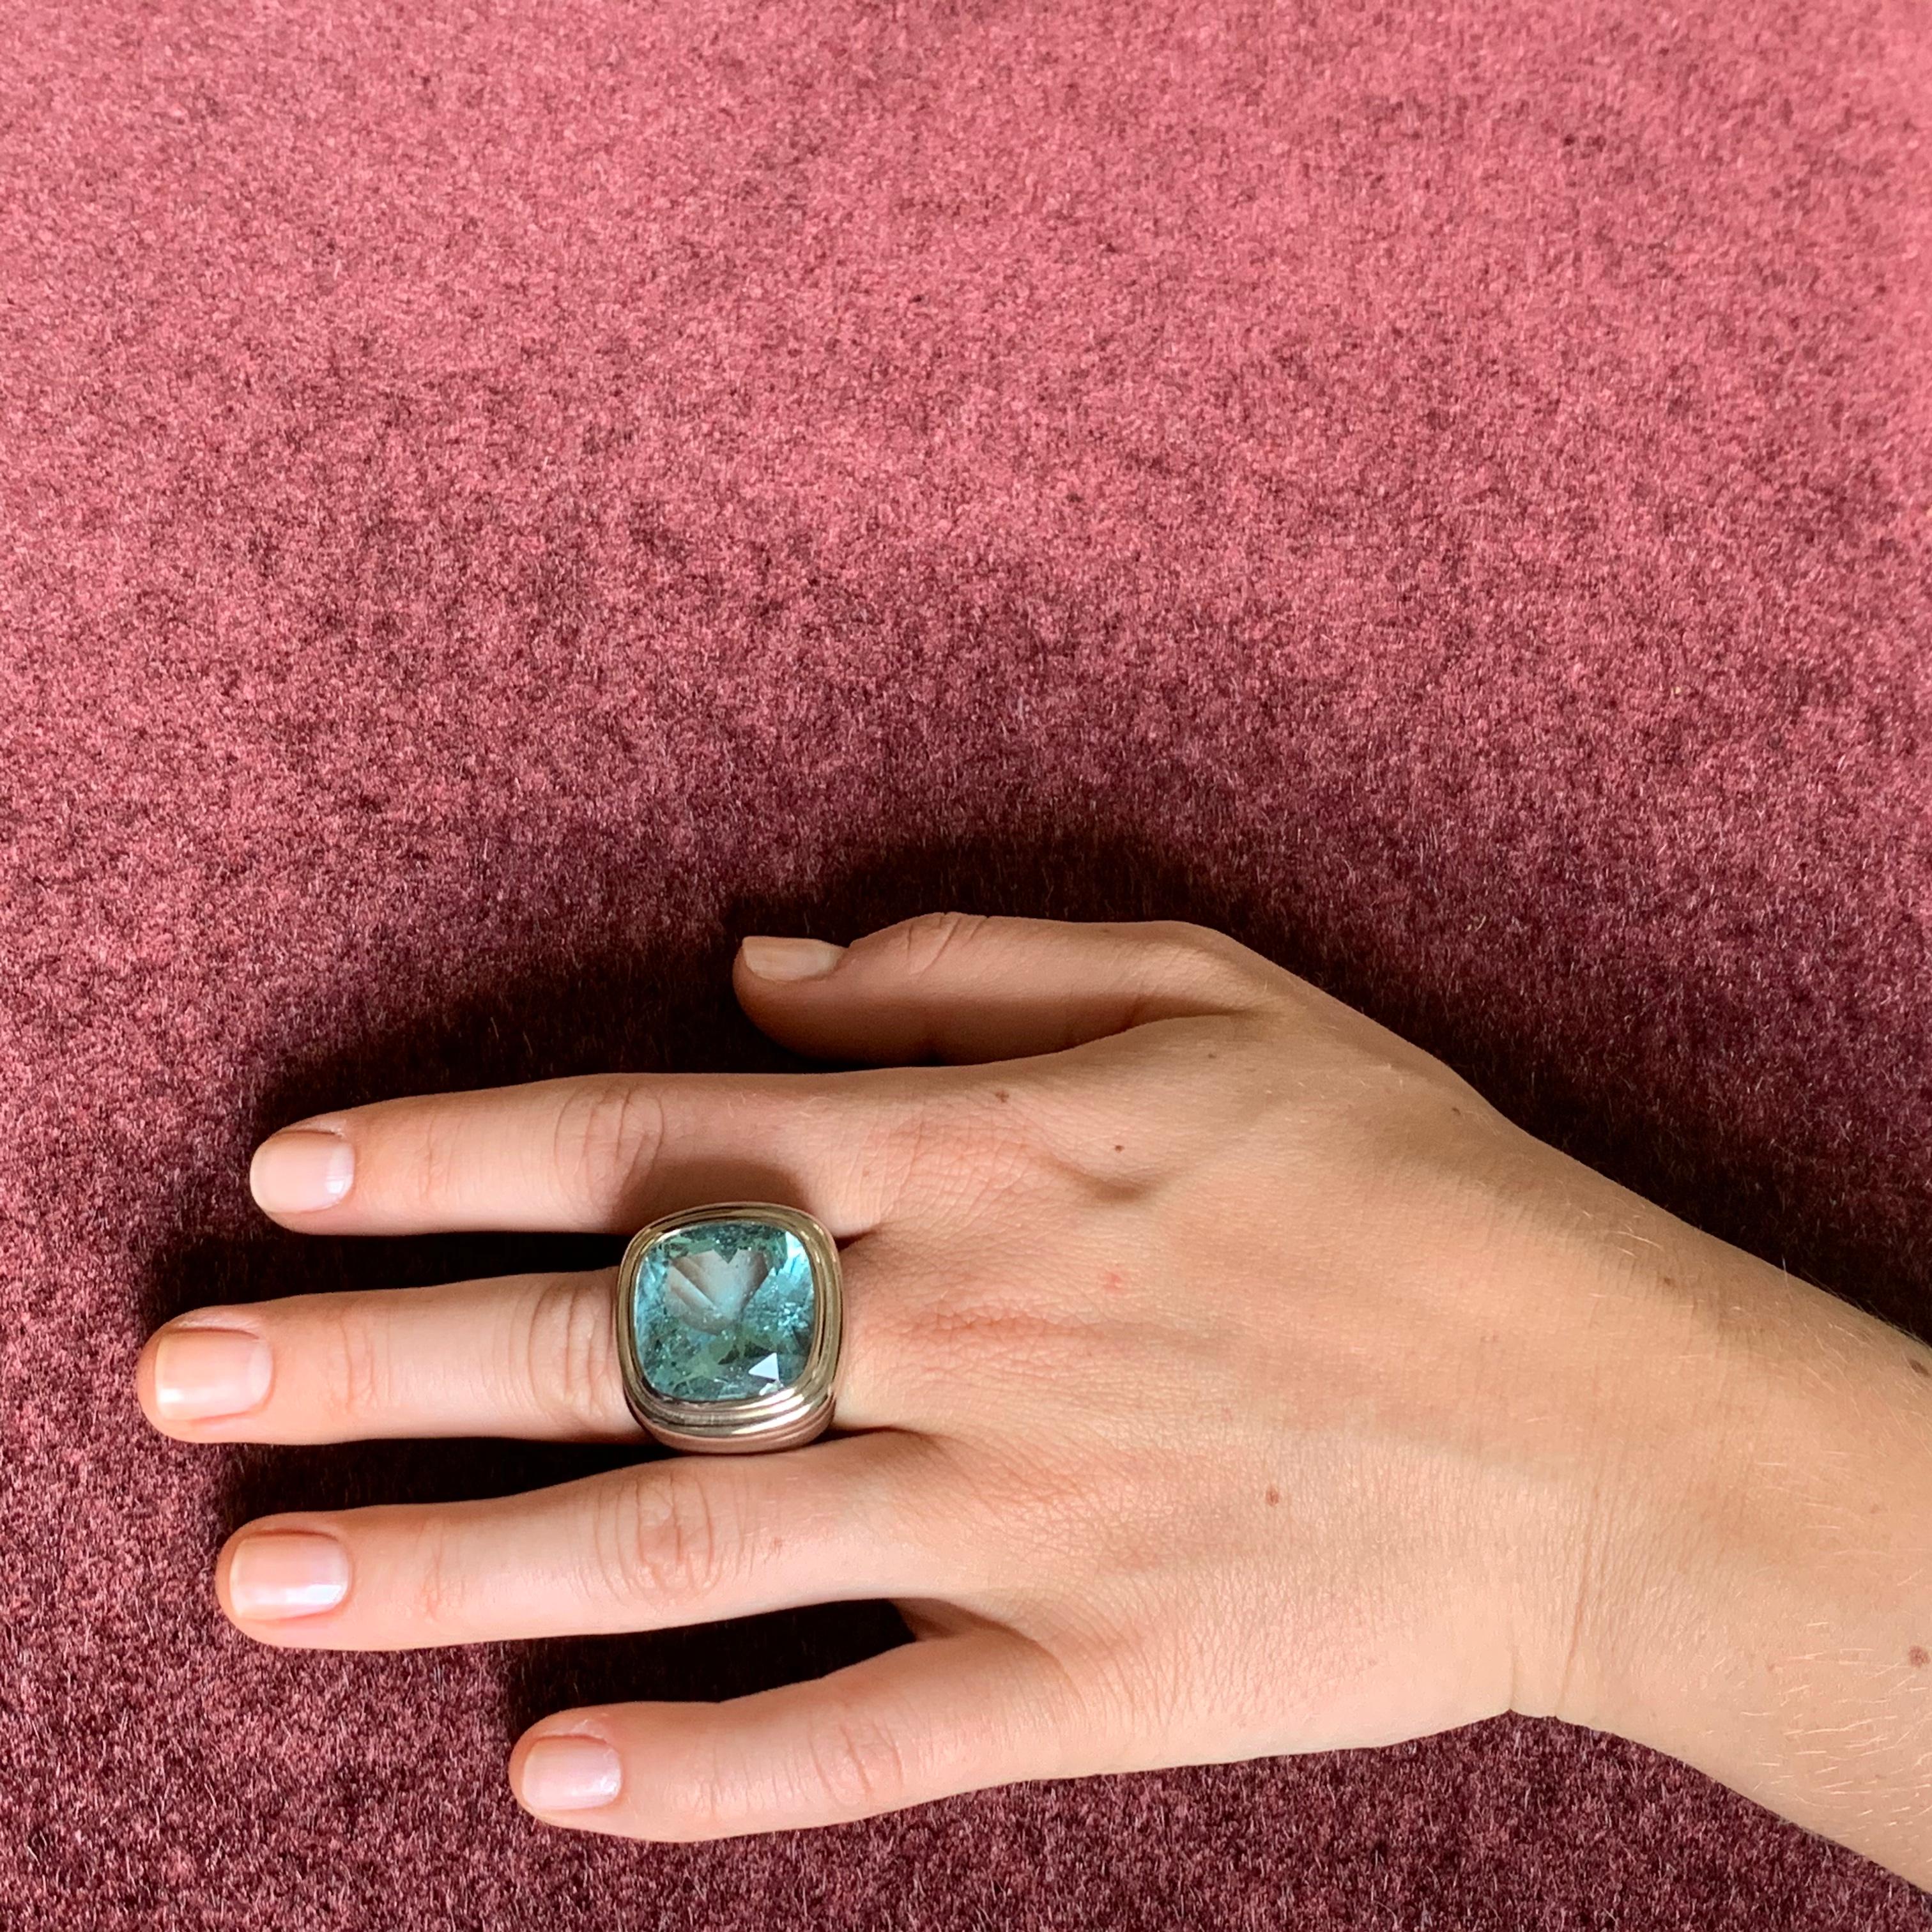 Ring in 18 Carat White Gold with 1 Aquamarine of 25.48 ct from the Middle Ages Collection.

Inspired by the elements and shapes of the Middle Ages, the collection is one of the most coveted by Colleen B. Rosenblat. Delicate yet bold crosses and